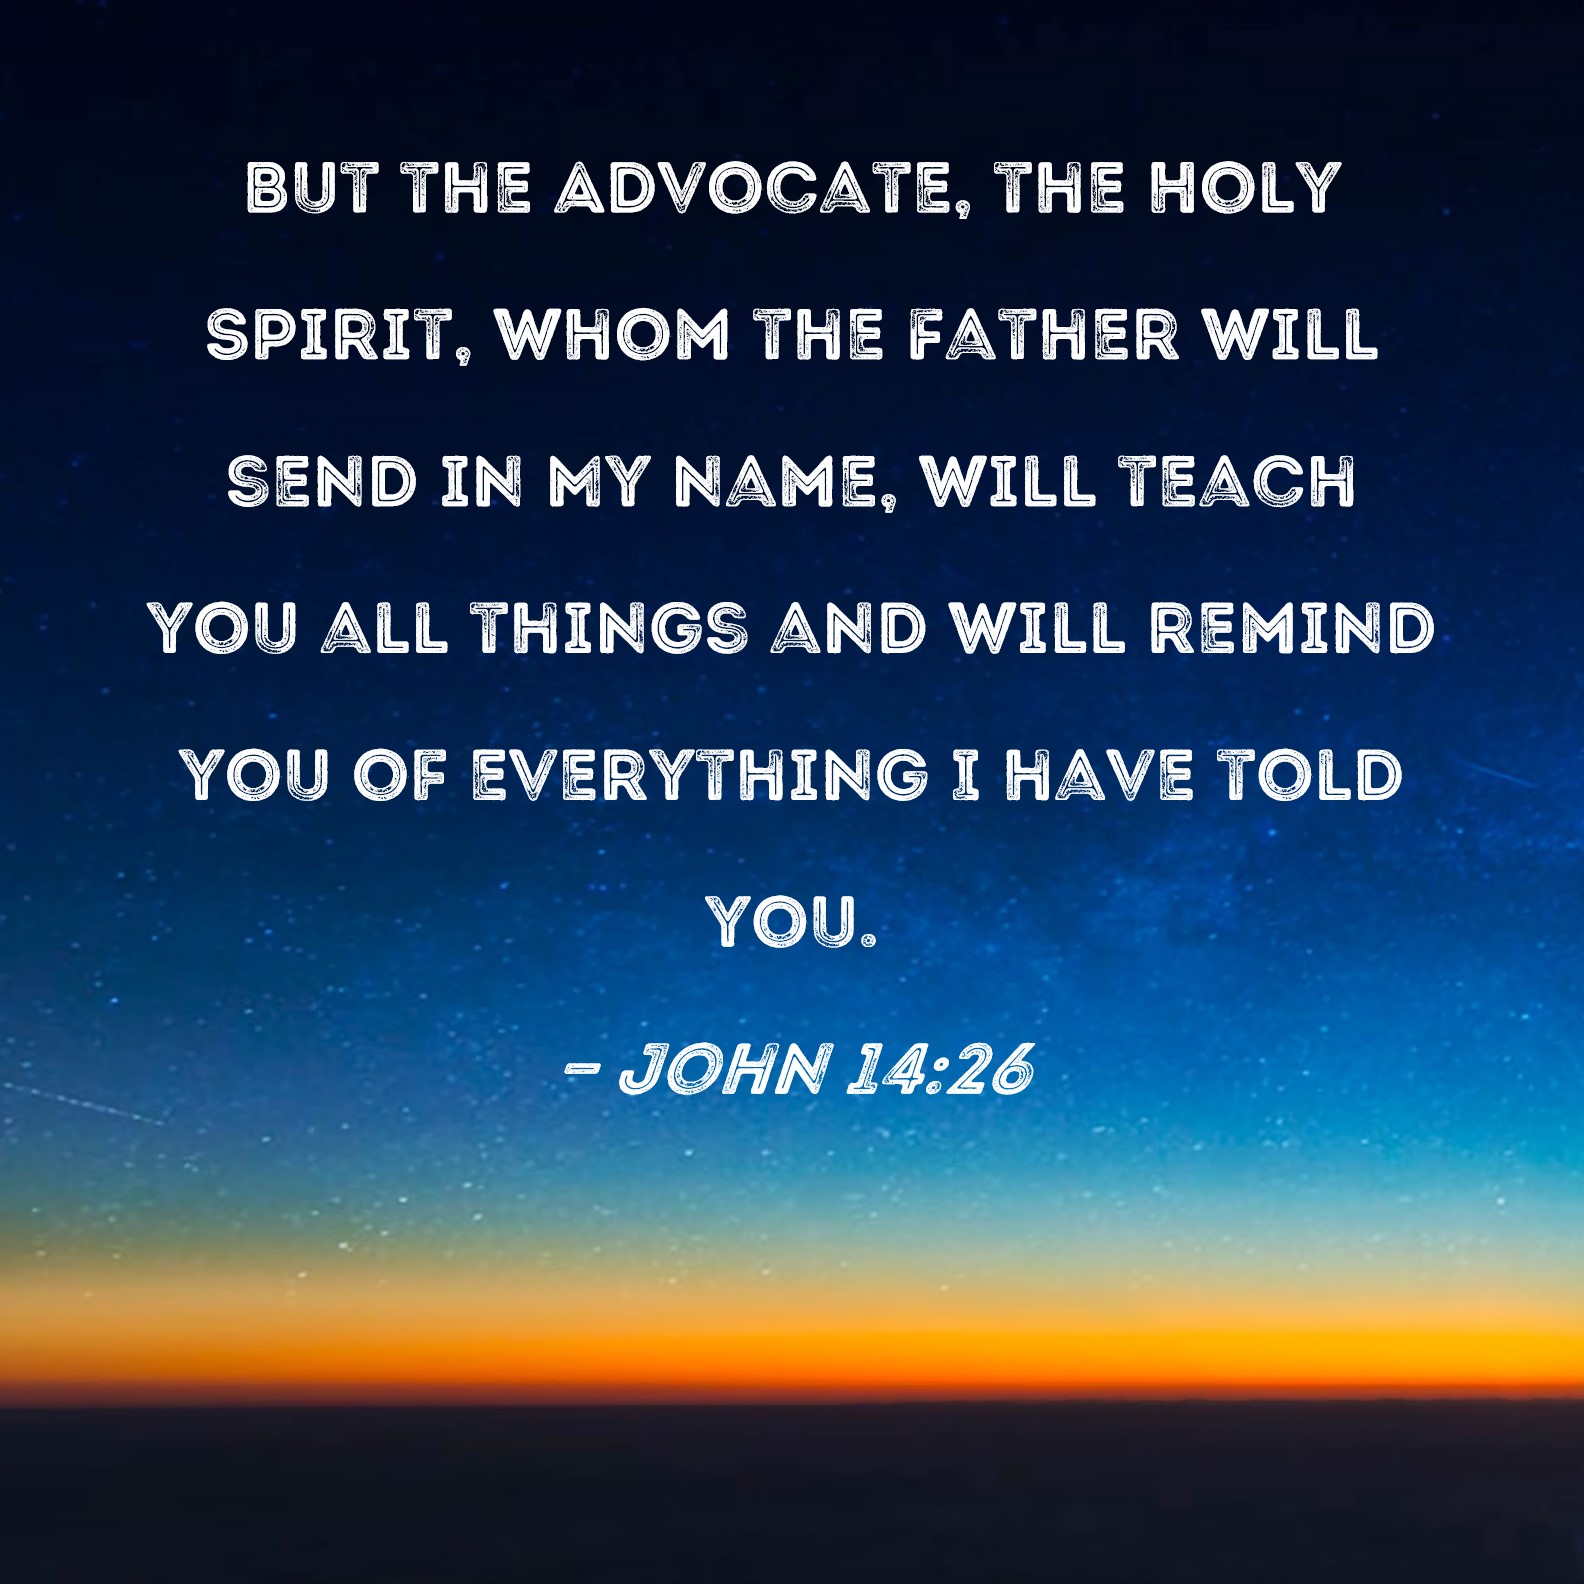 John 14:26 But the Advocate, the Holy Spirit, whom the Father will send in  My name, will teach you all things and will remind you of everything I have  told you.